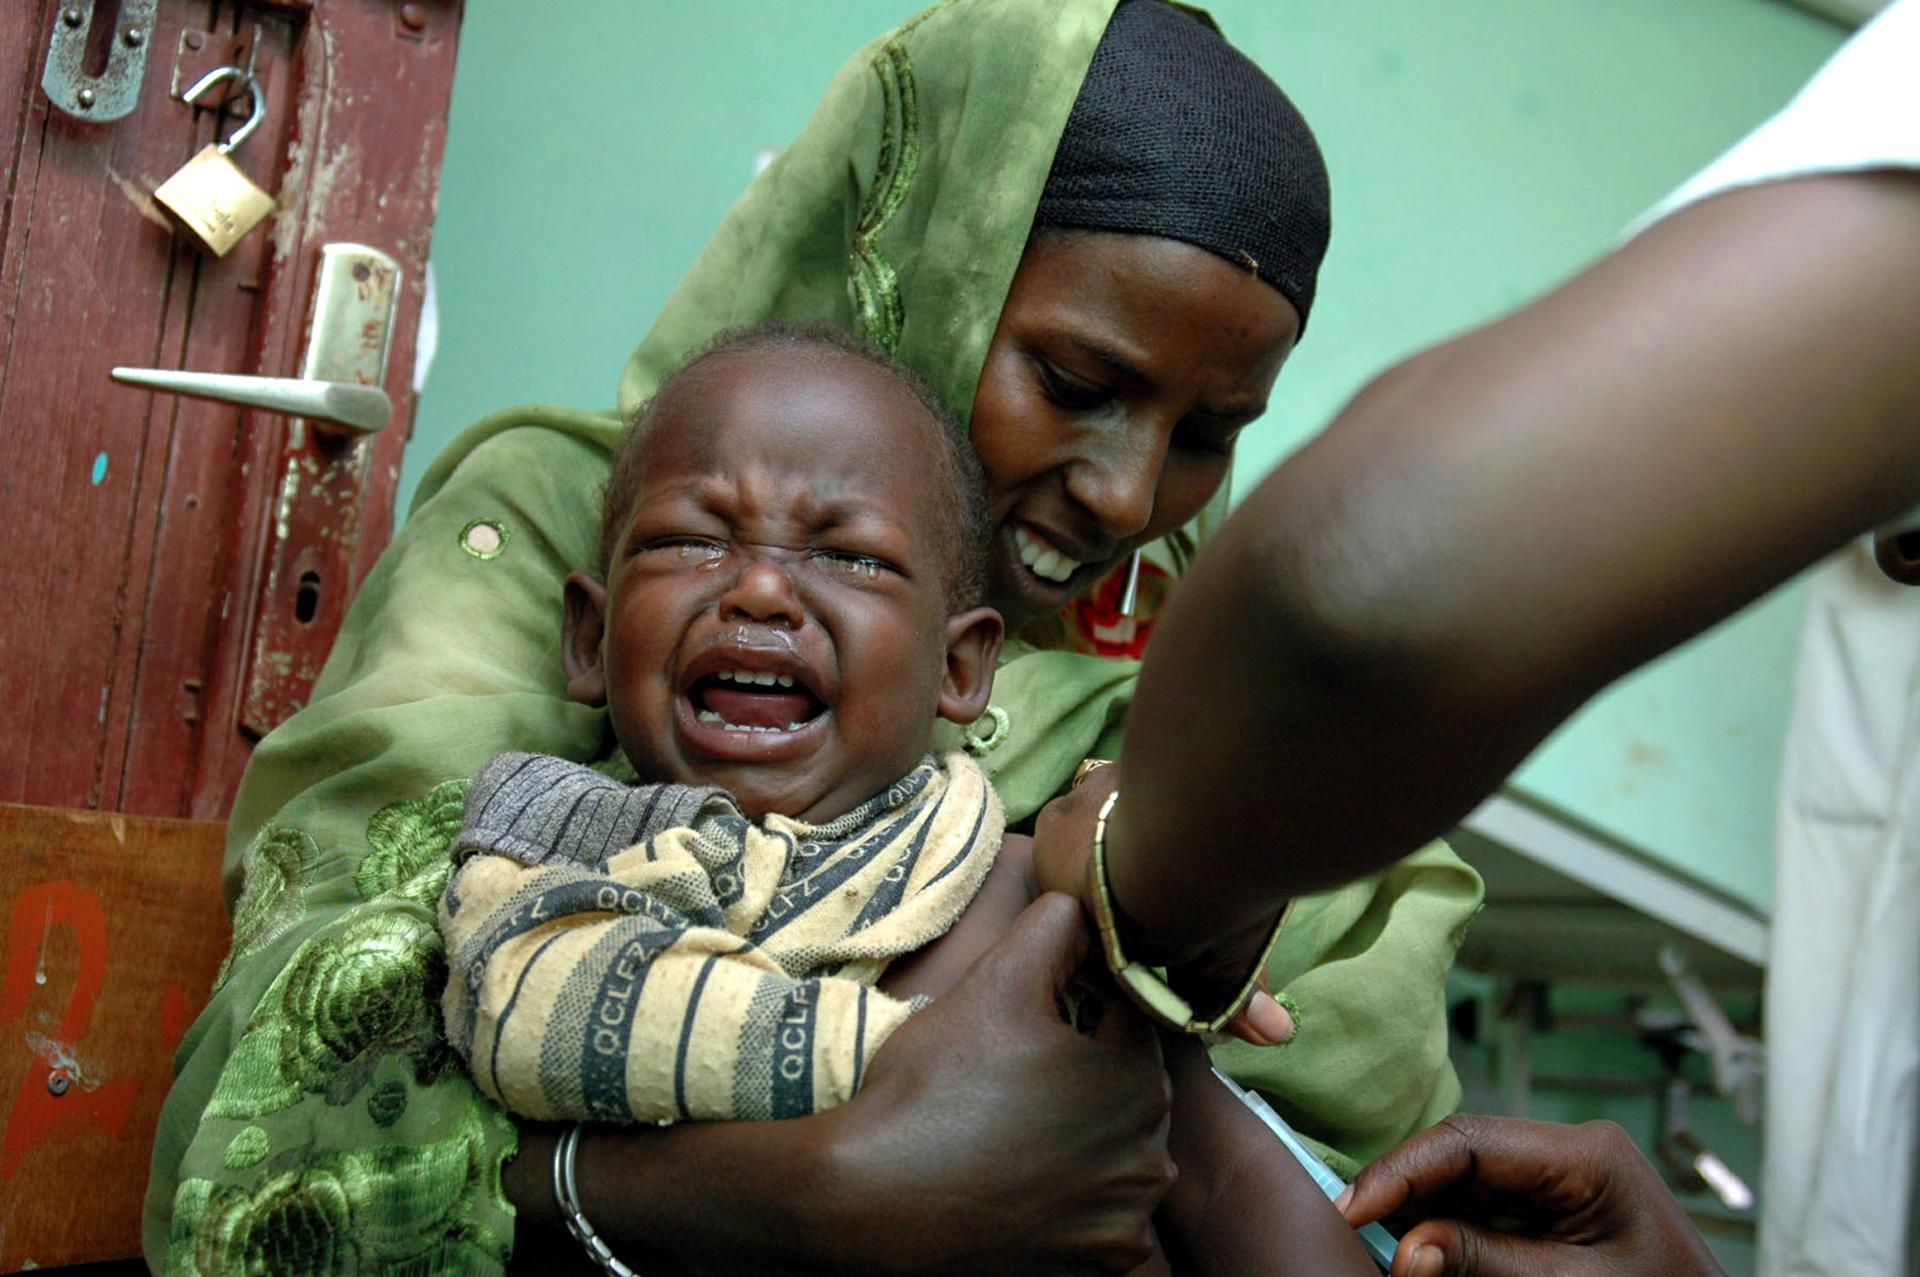 A young boy in Ethiopia cries as he gets a measles vaccination